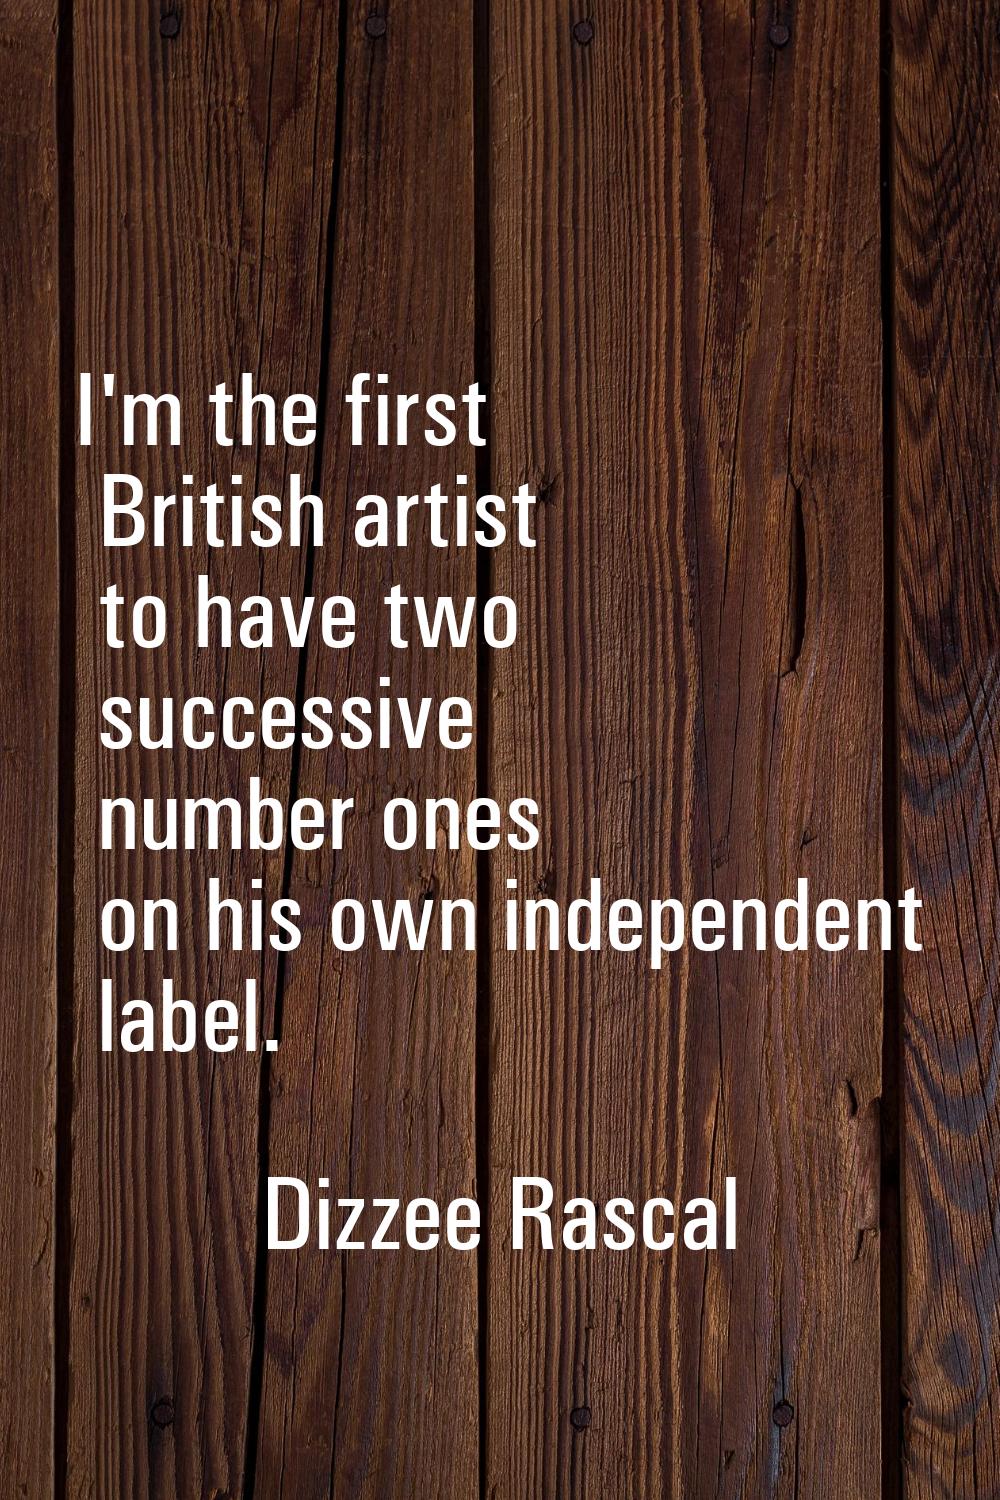 I'm the first British artist to have two successive number ones on his own independent label.